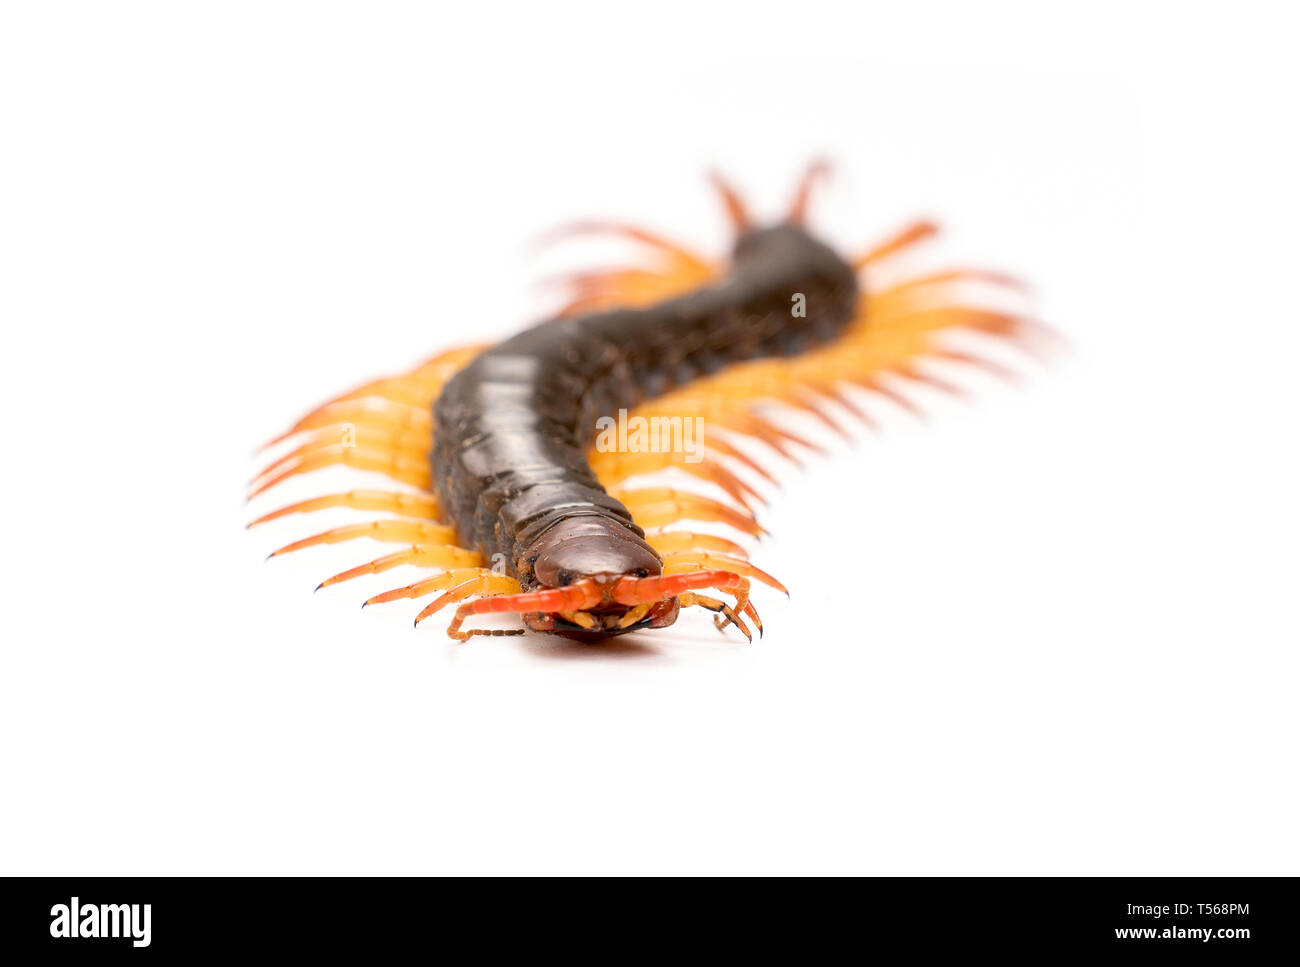 centipede or chilopoda isolated on white background Stock Photo